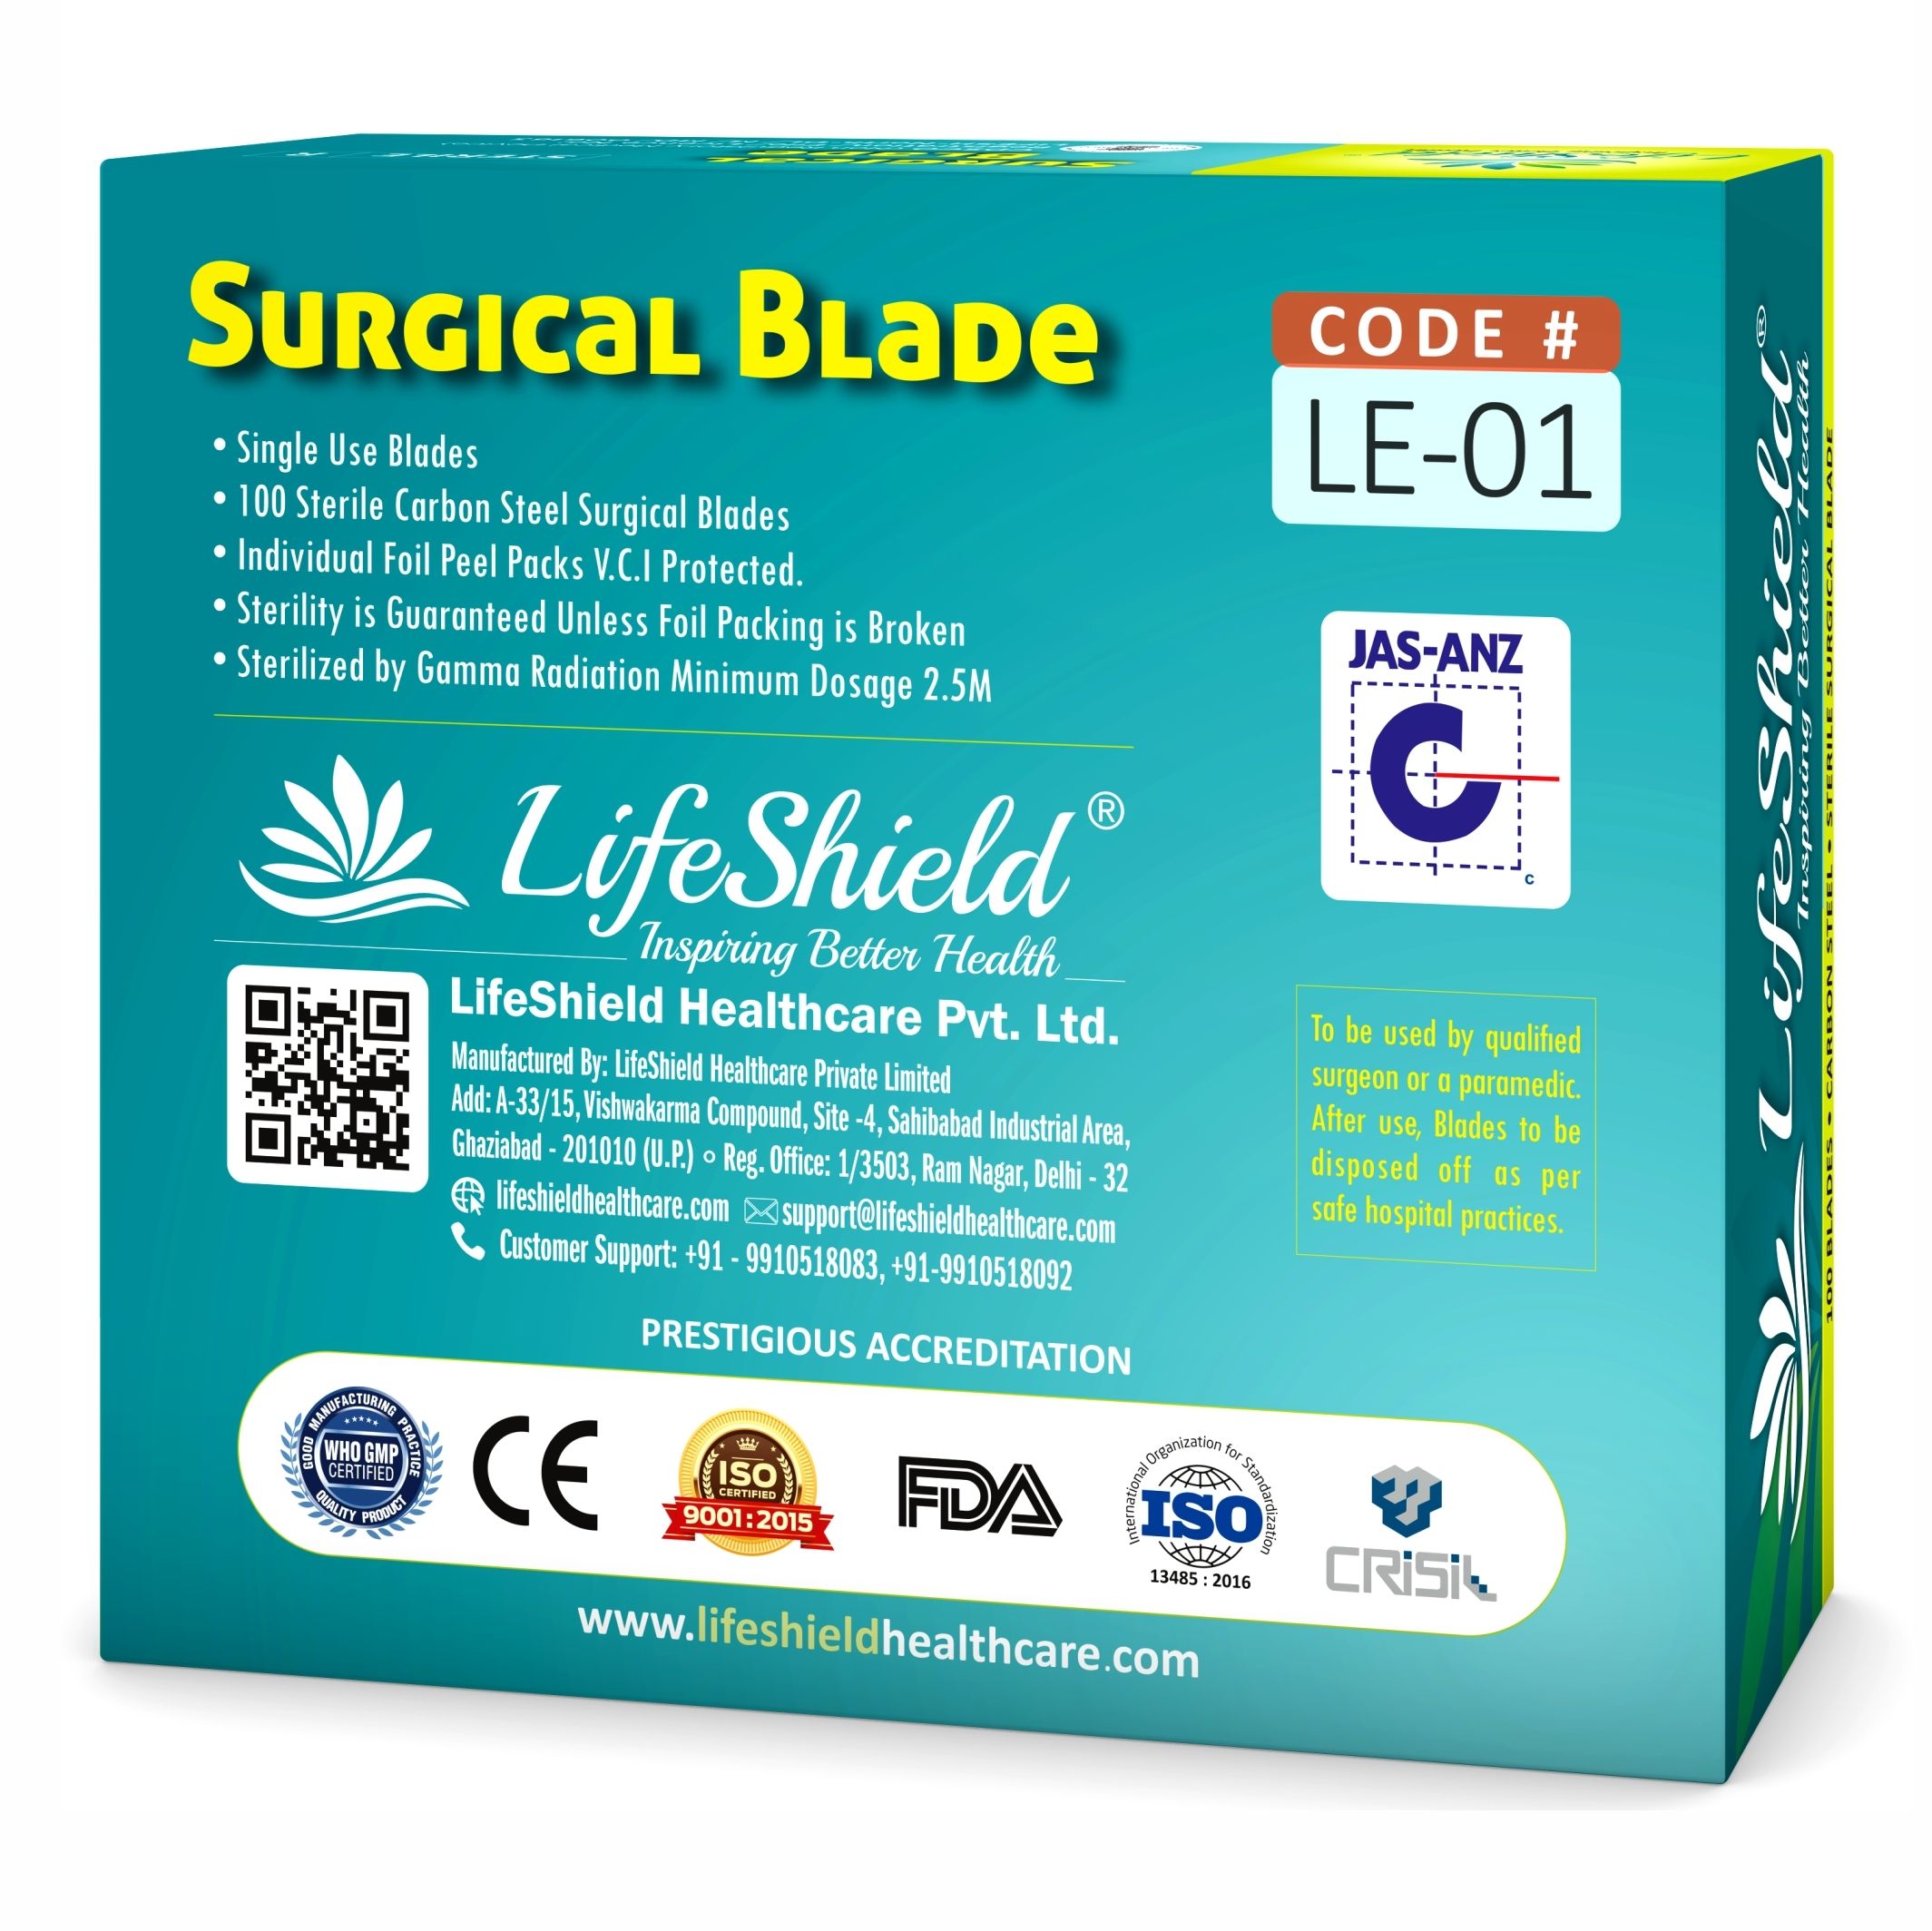 Surgical blade